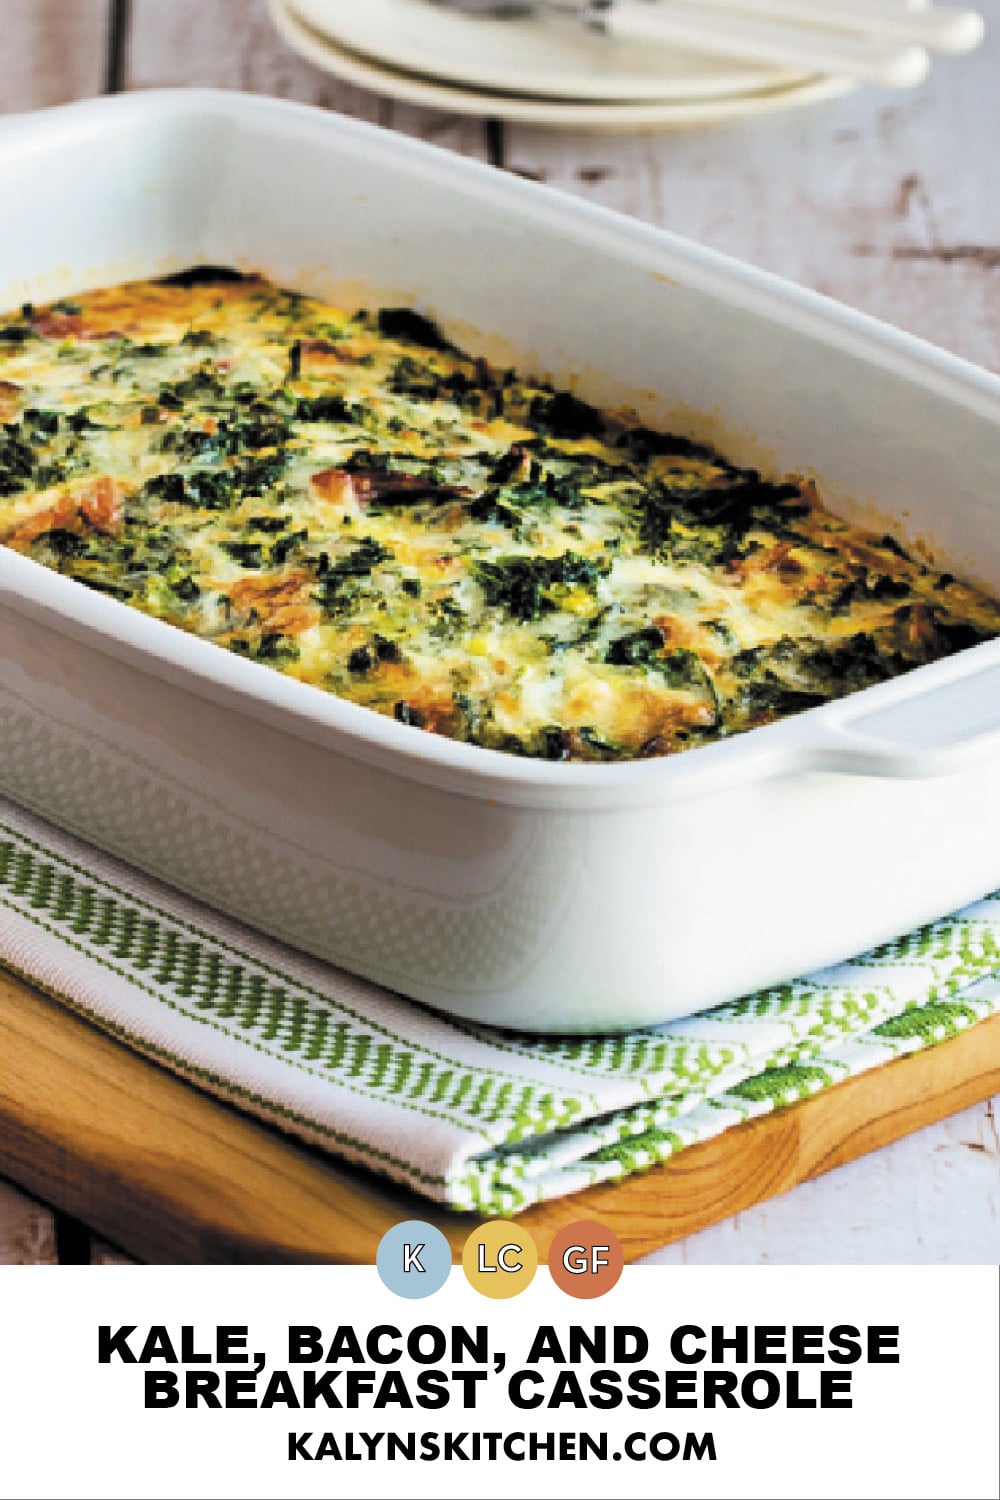 Pinterest image of Kale, Bacon, and Cheese Breakfast Casserole